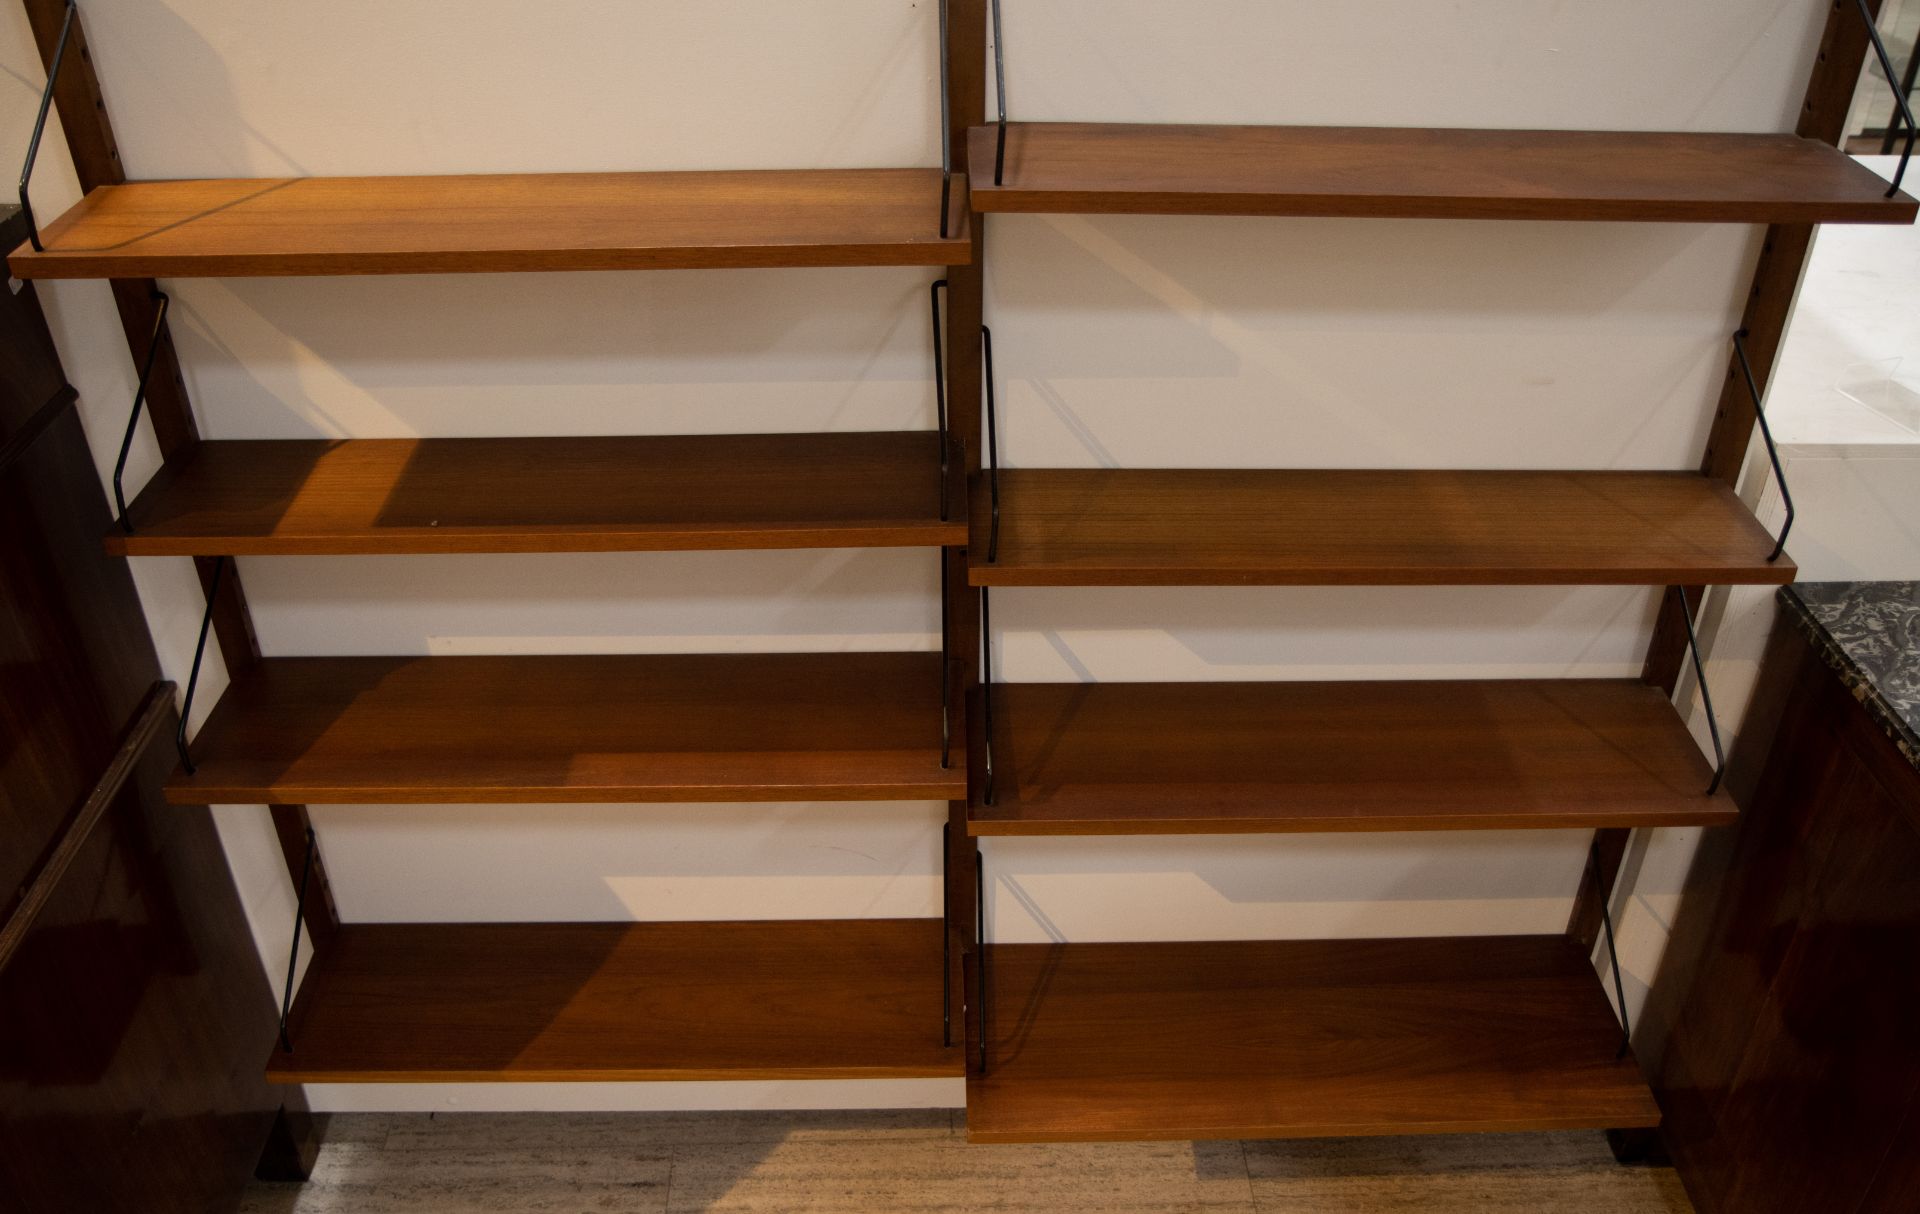 Vintage wall system - book rack in Cadovius style, 1960s, Scandinavian design - Image 2 of 2